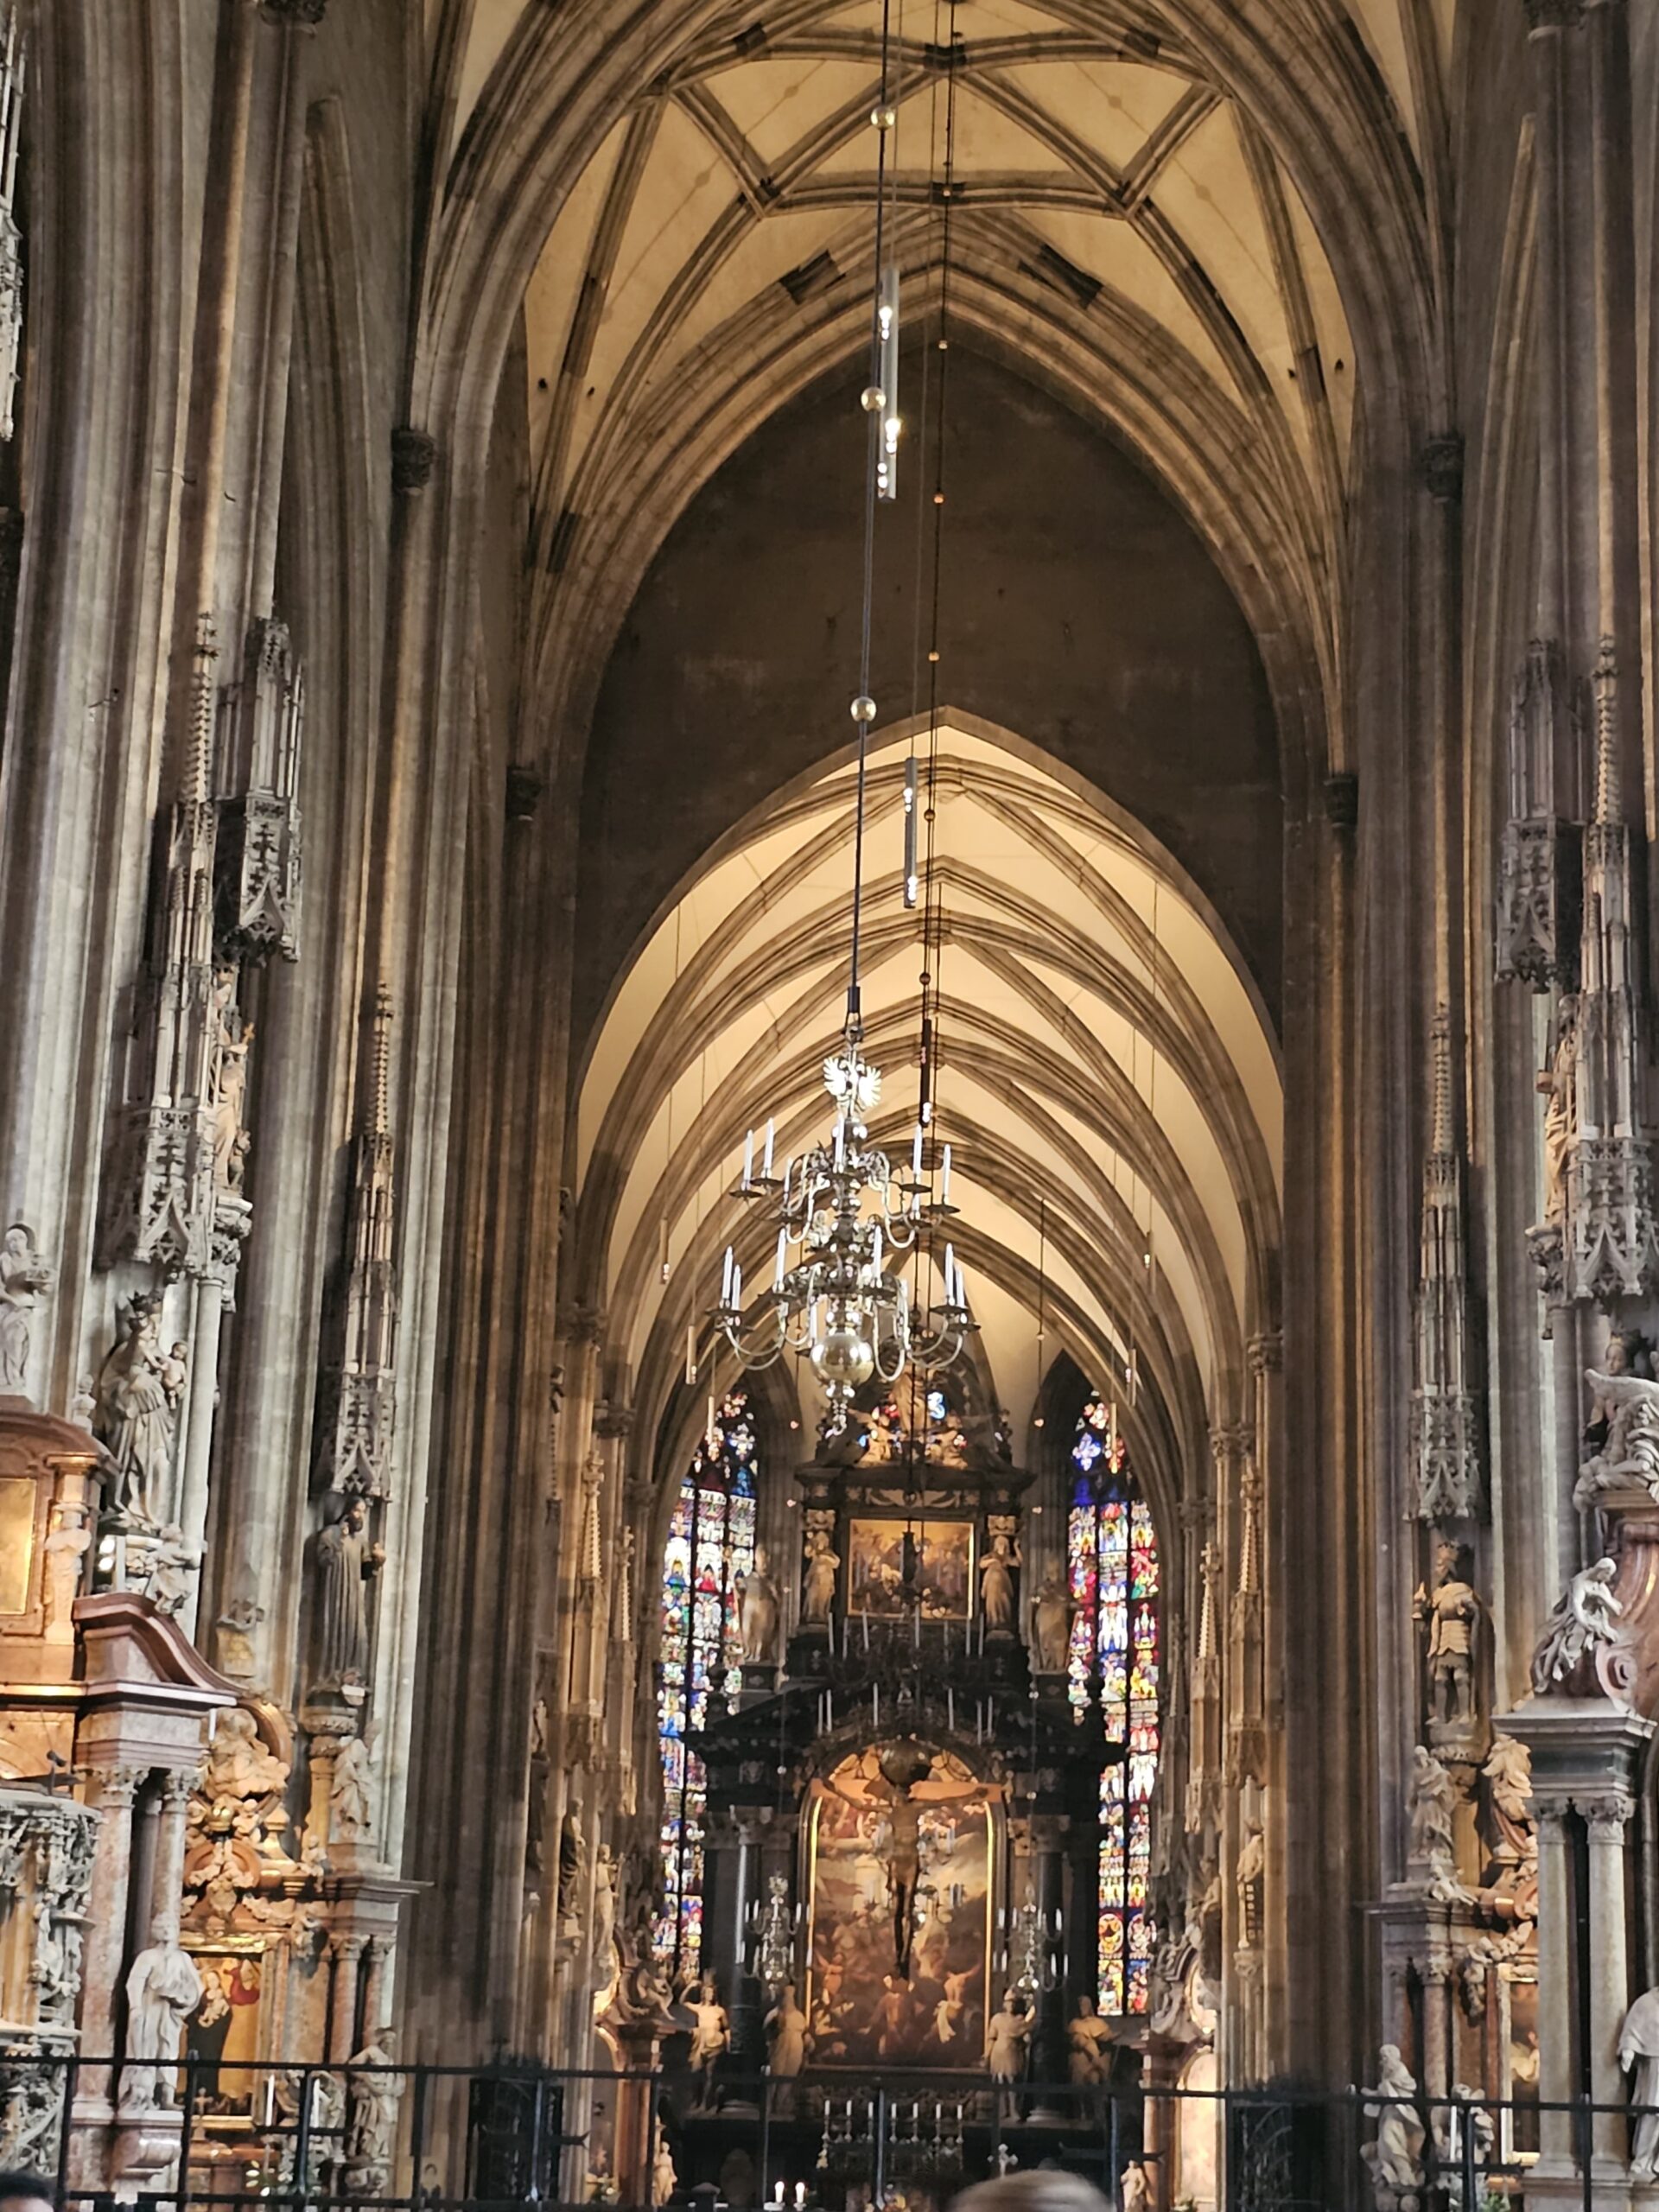 The central walkway or nave of St Stephen's Cathedral, Vienna